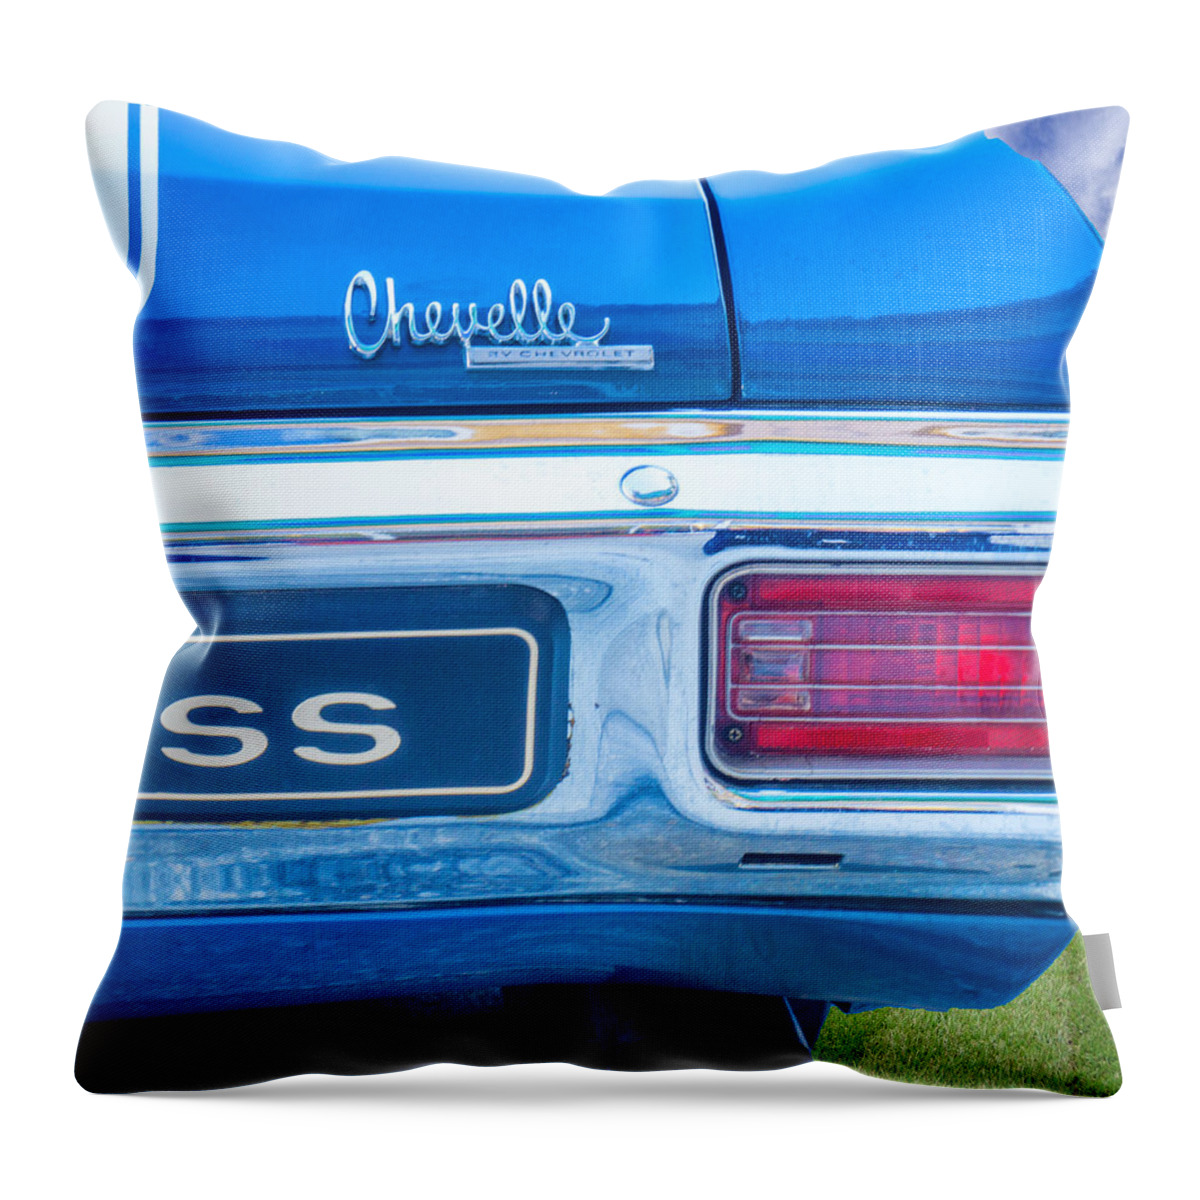 Chevelle Throw Pillow featuring the photograph 1970 Tailights by Dennis Dugan